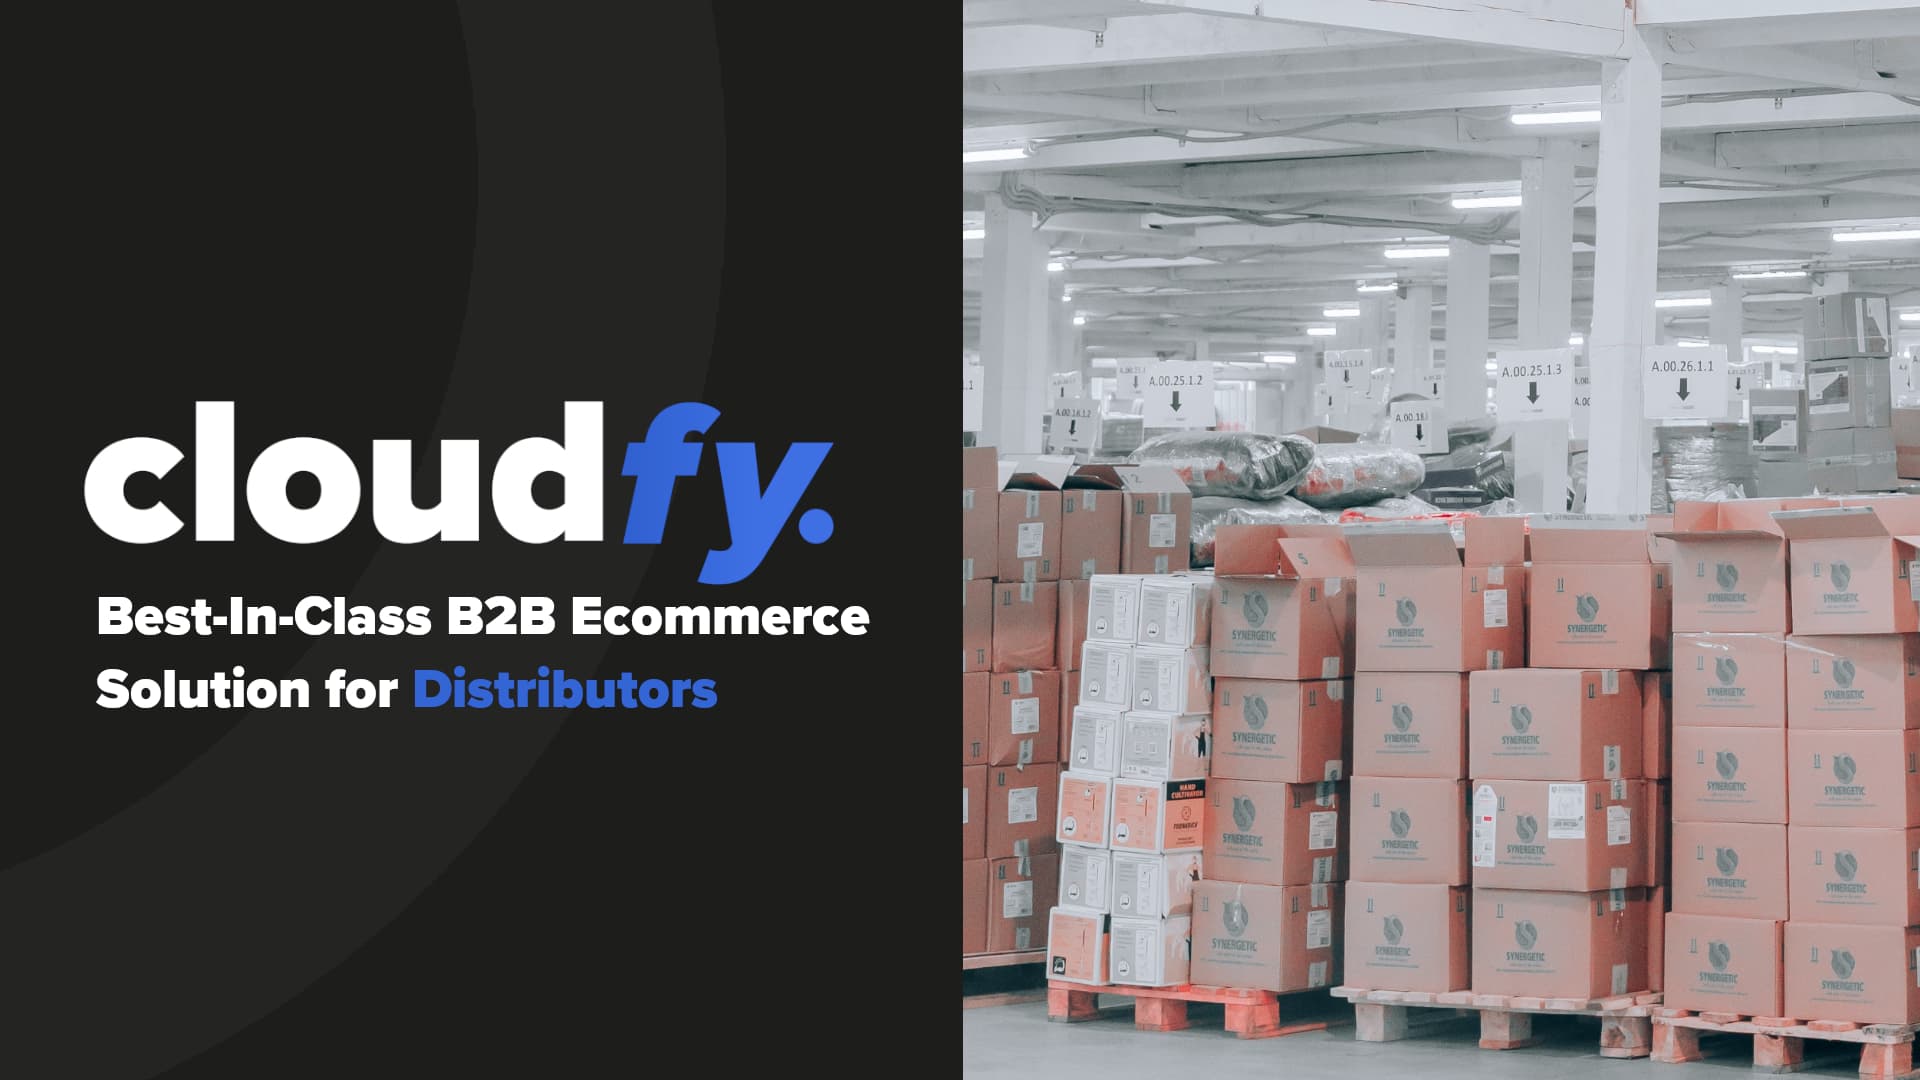 Intro slide for Youtube video about B2B ecommerce solutions for distributors